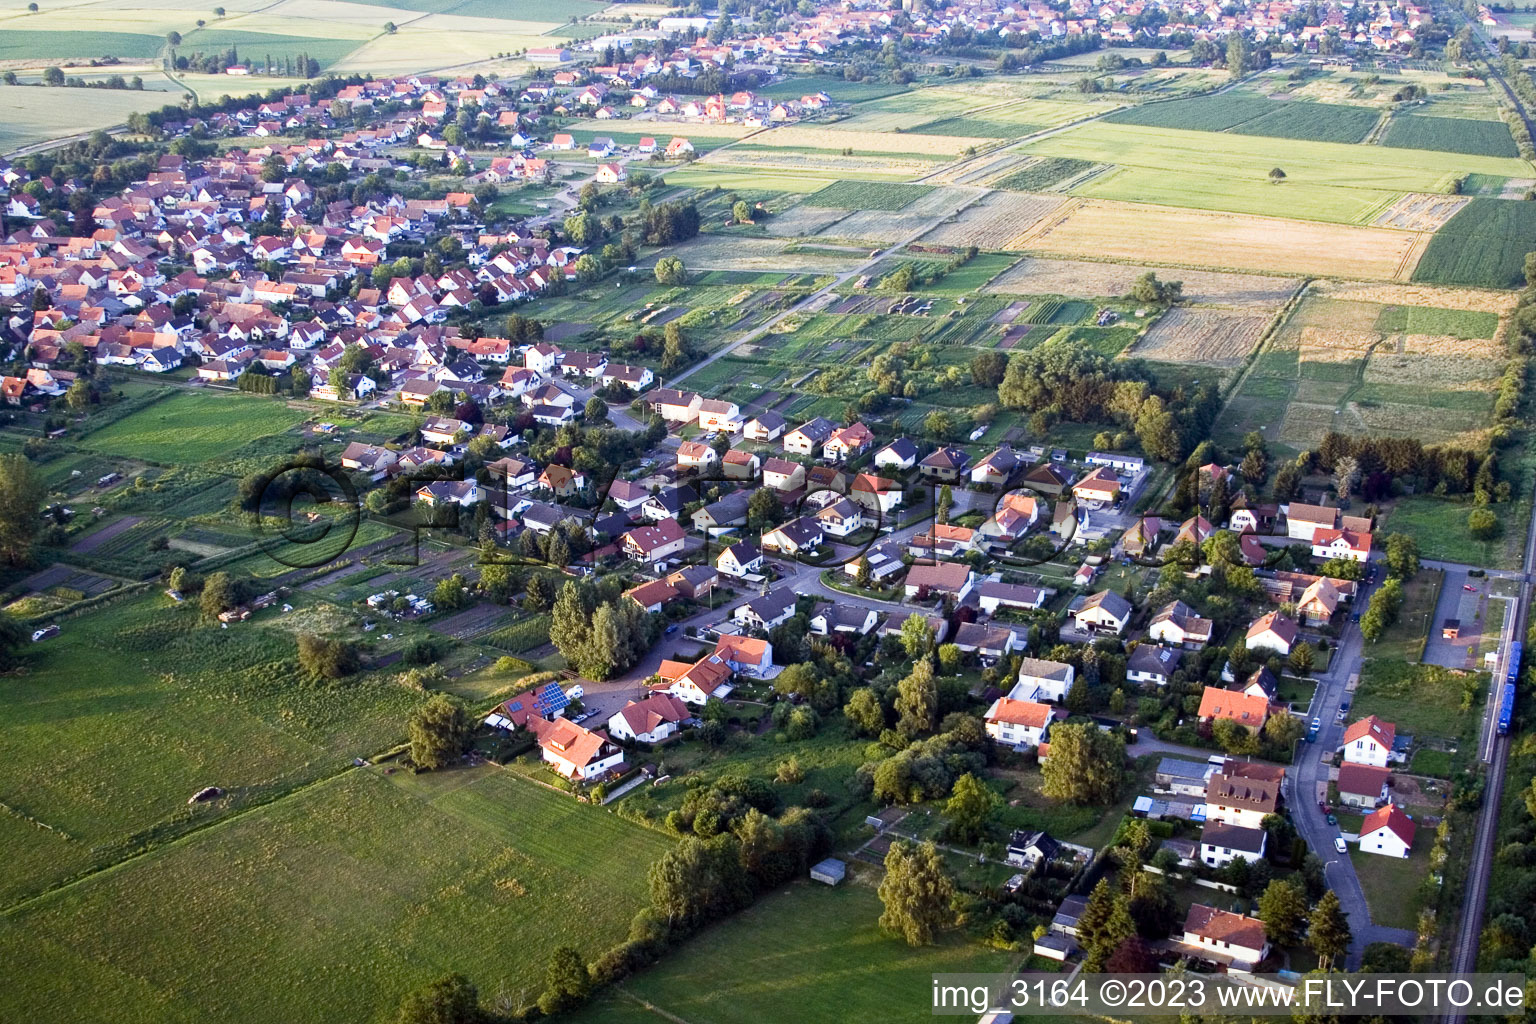 Kapsweyer in the state Rhineland-Palatinate, Germany seen from a drone